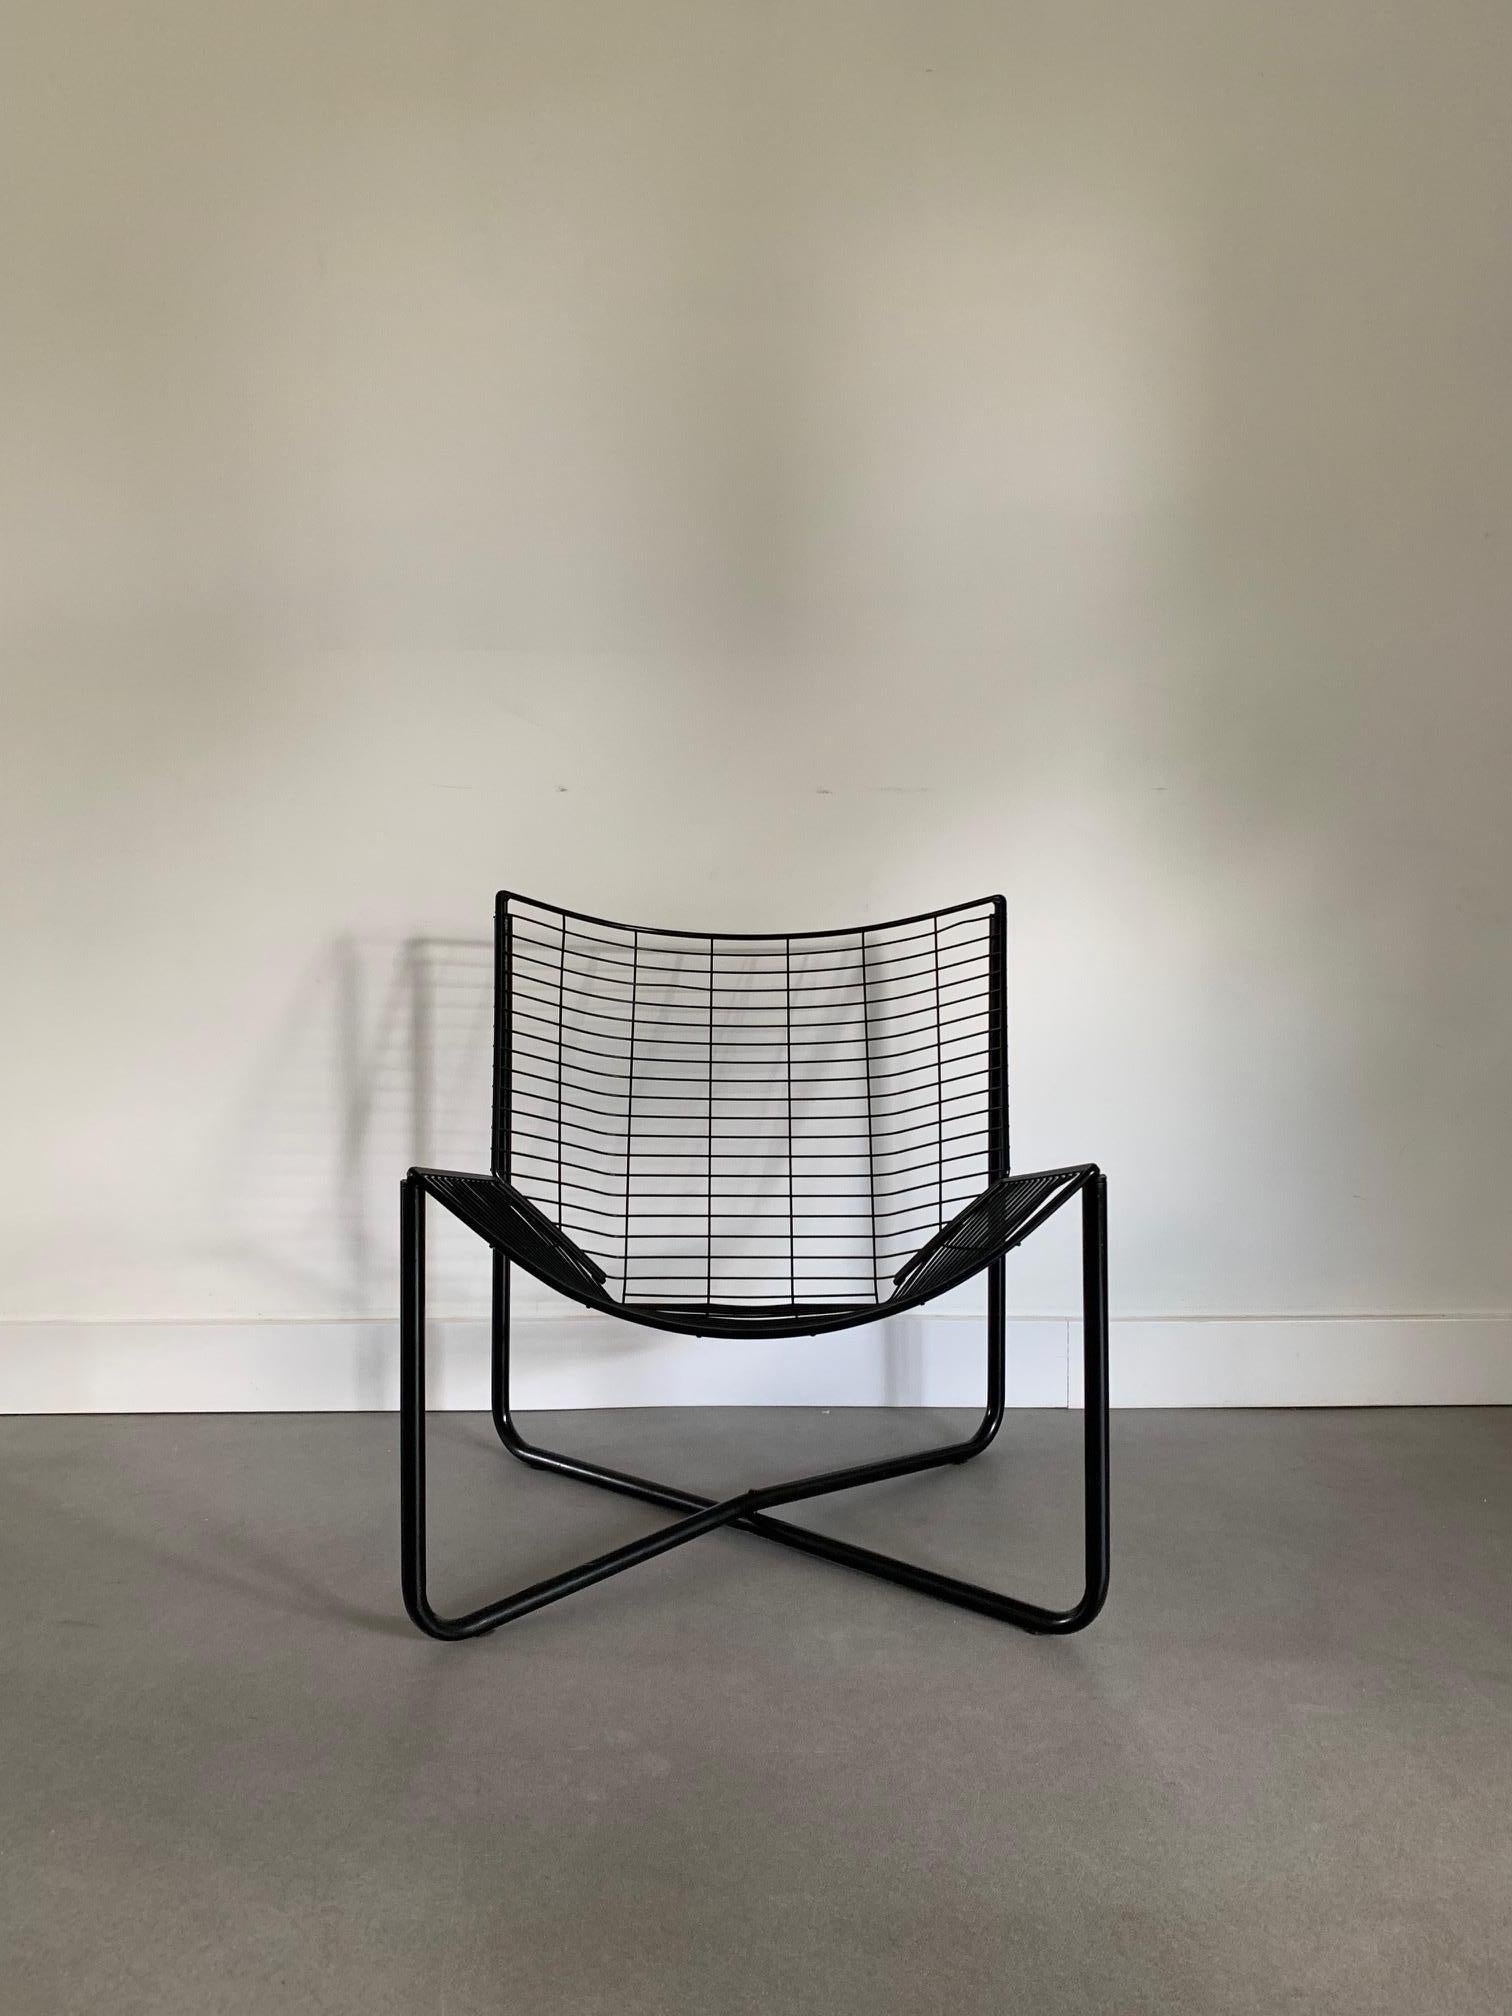 The Jarpen Wire Lounge Chair is a modern seating solution designed by Danish furniture designer Niels Gammelgaard for IKEA in 1983. The chair is part of a larger collection of furniture that was designed to be affordable, functional, and